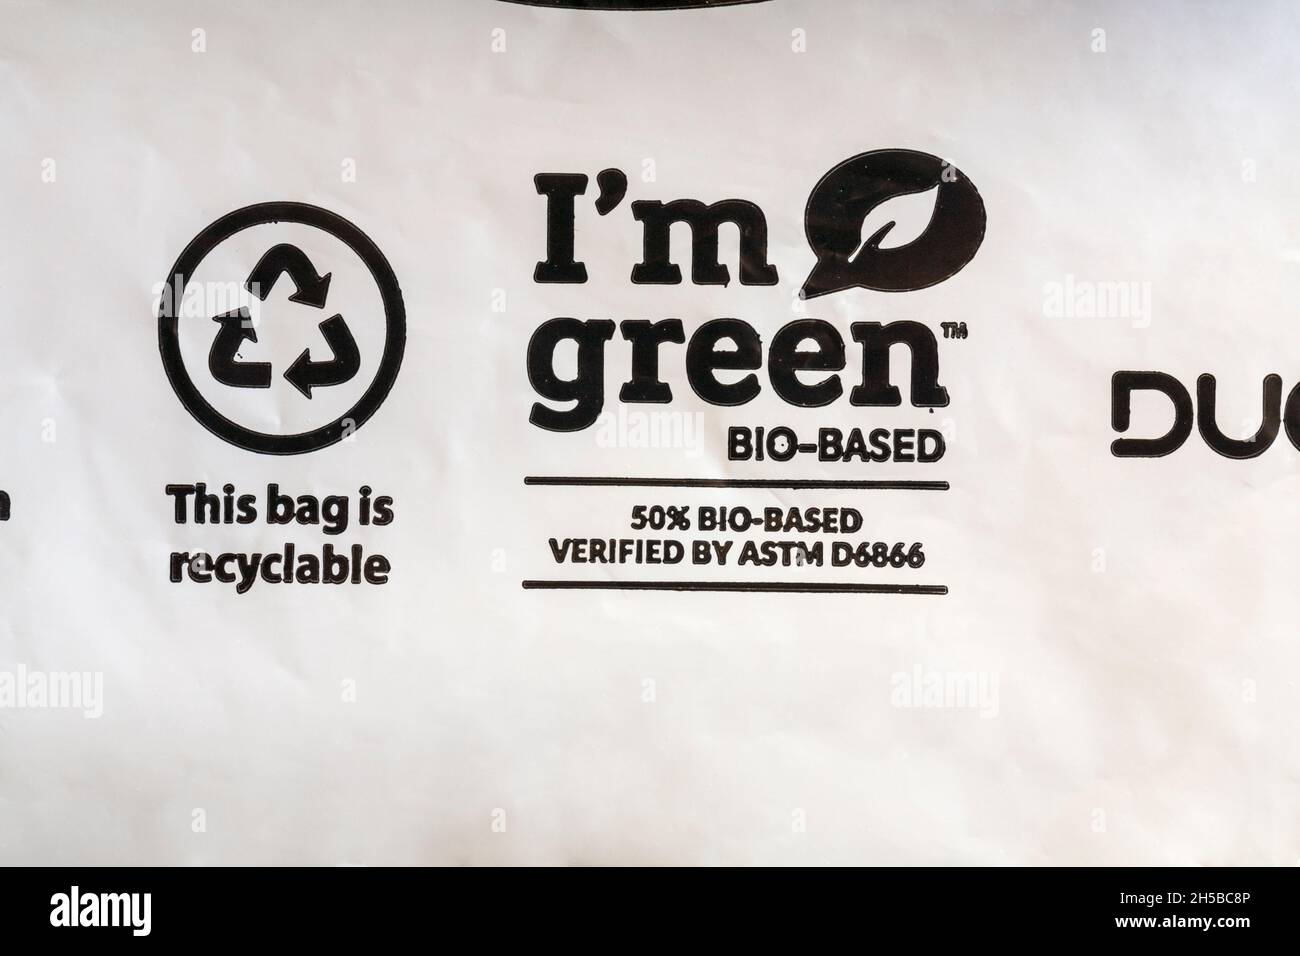 I'm Green bio-based 50% bio-based verified by ASTM D6866 - Information this bag is recyclebar - Detail on Packaging bag, recyclebar Packaging Stockfoto